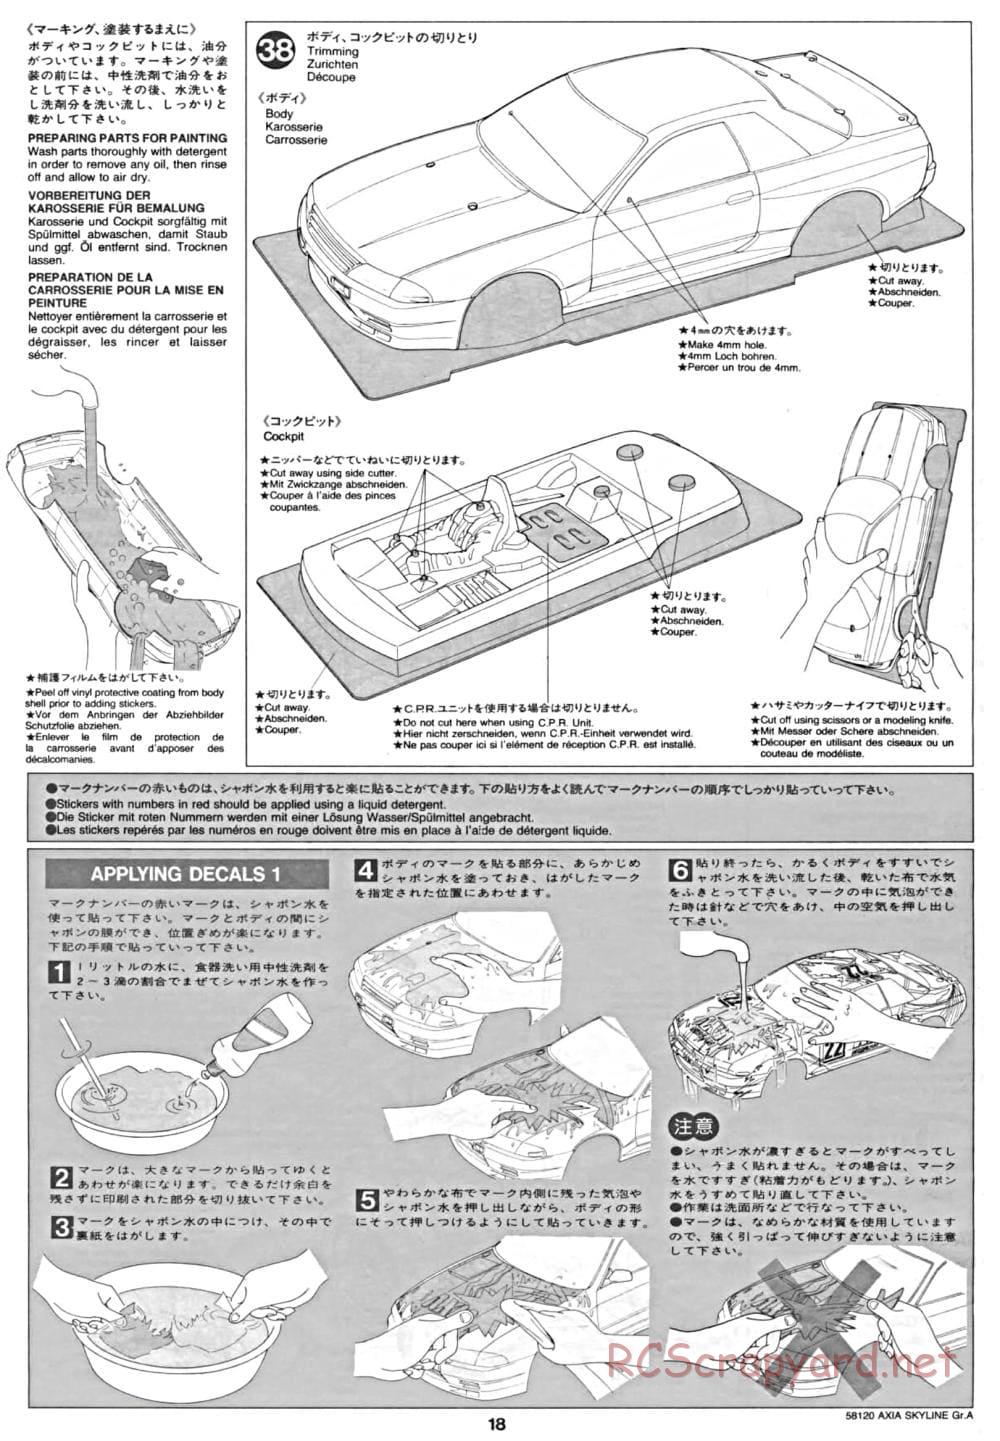 Tamiya - Axia Skyline GT-R Gr.A - TA-01 Chassis - Manual - Page 18